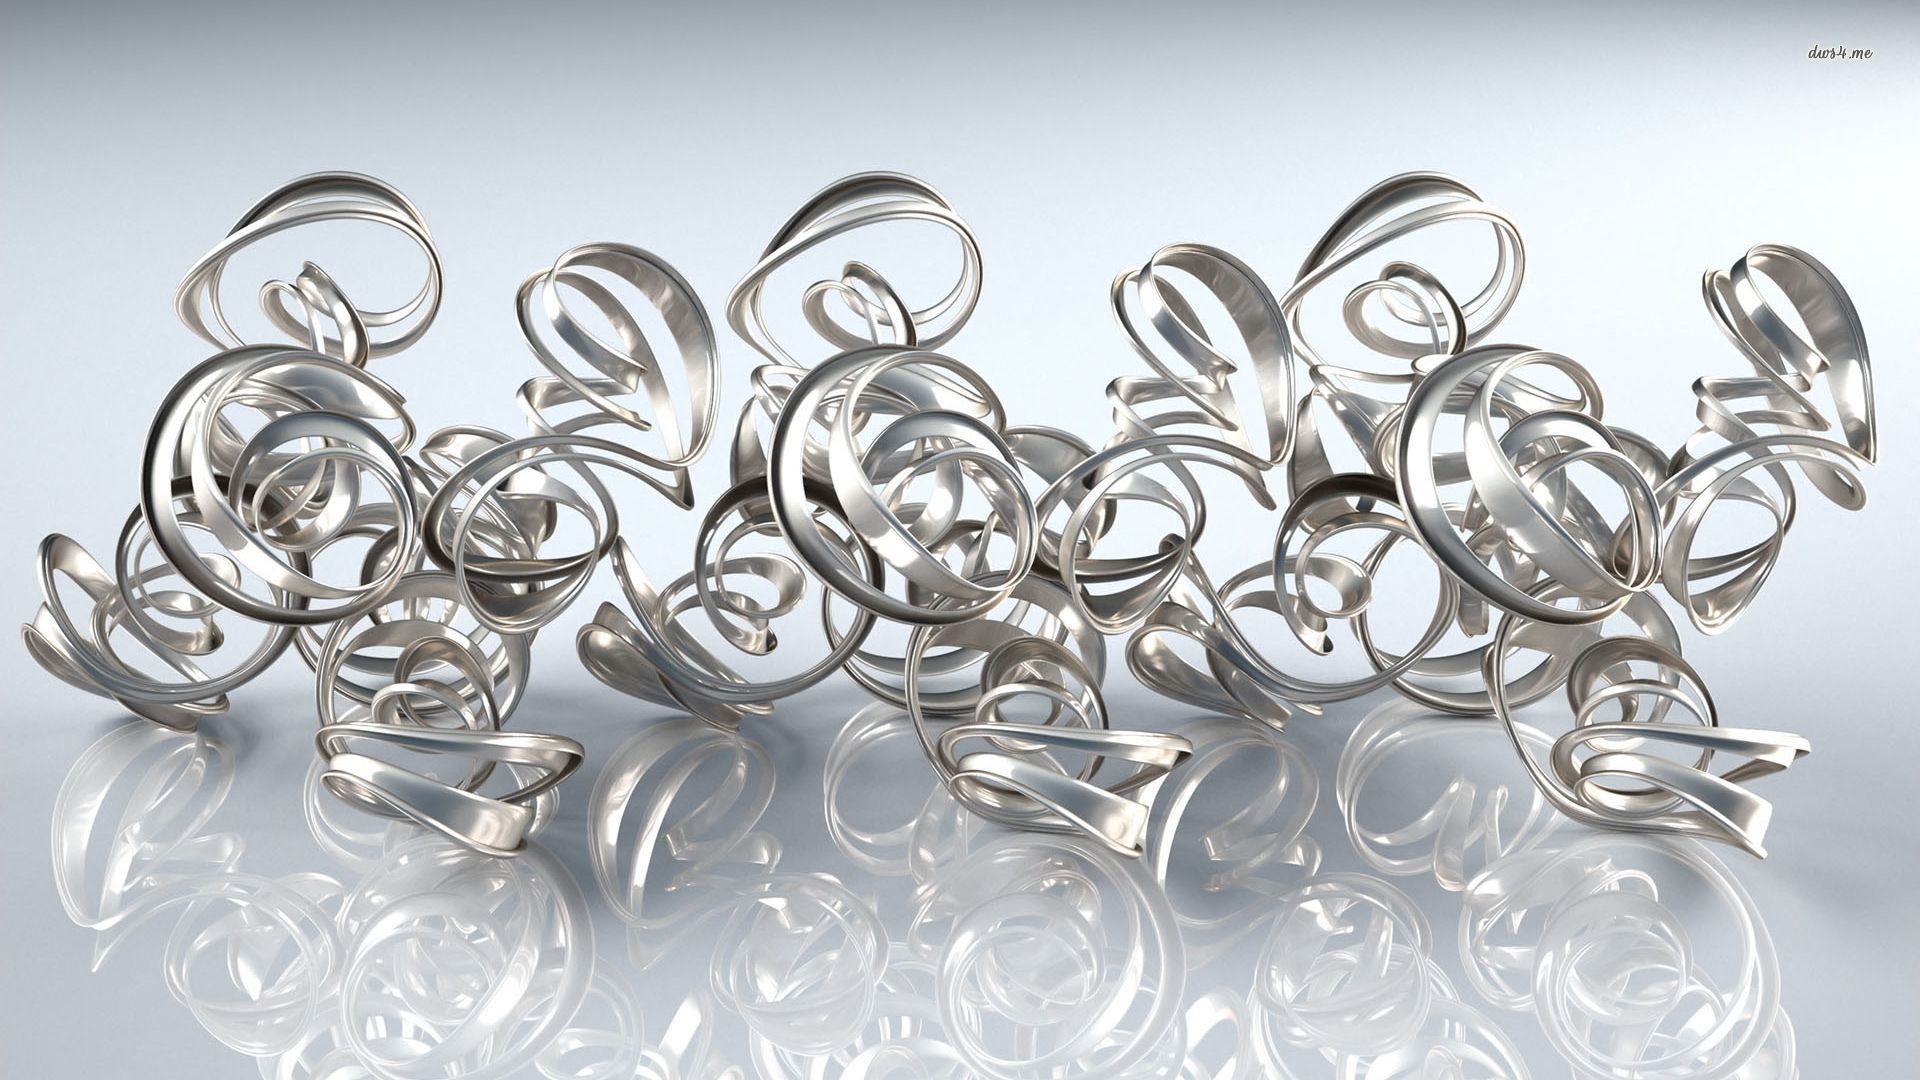 TWISTED SILVER METALLIC SHAPES WALLPAPER